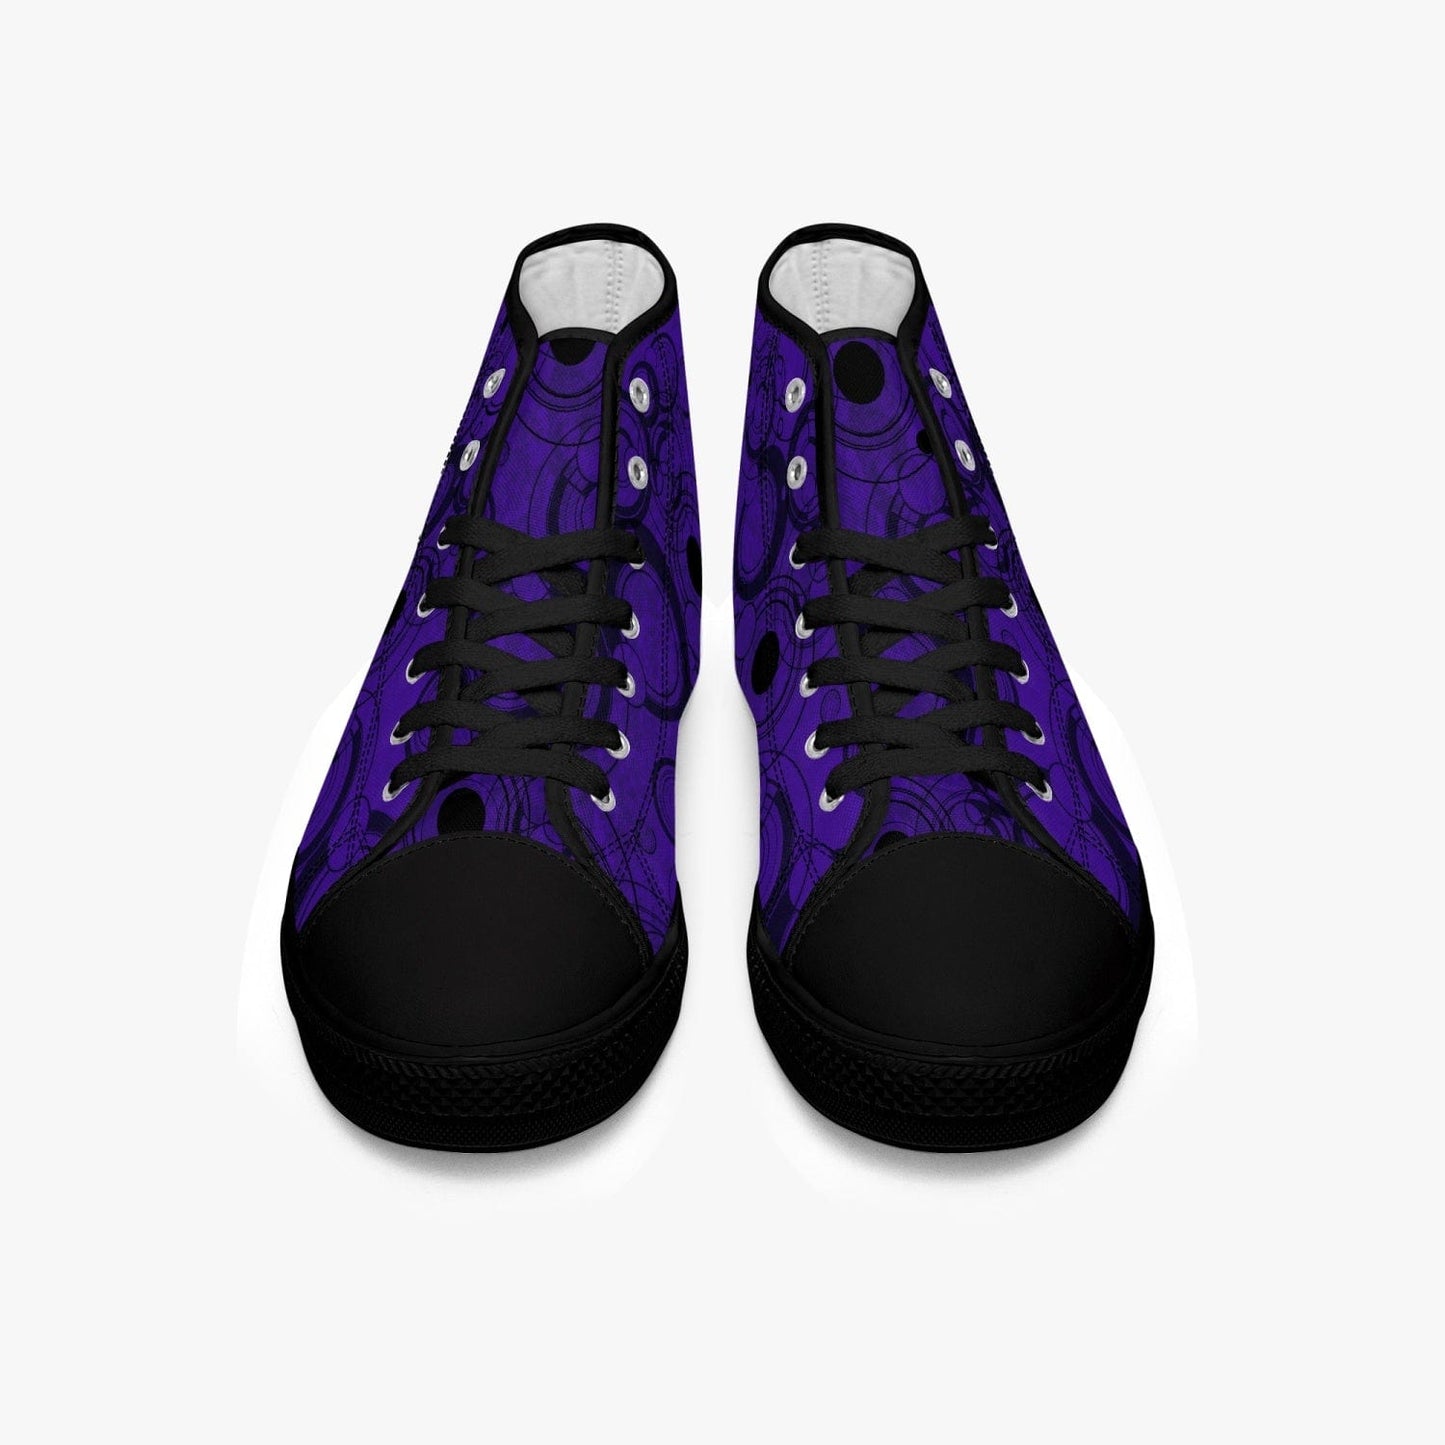 front view of the Women's Time Lord Gallifreyan Gallifrey language retro sneakers in a vivid gothic purple at Gallery Serpentine